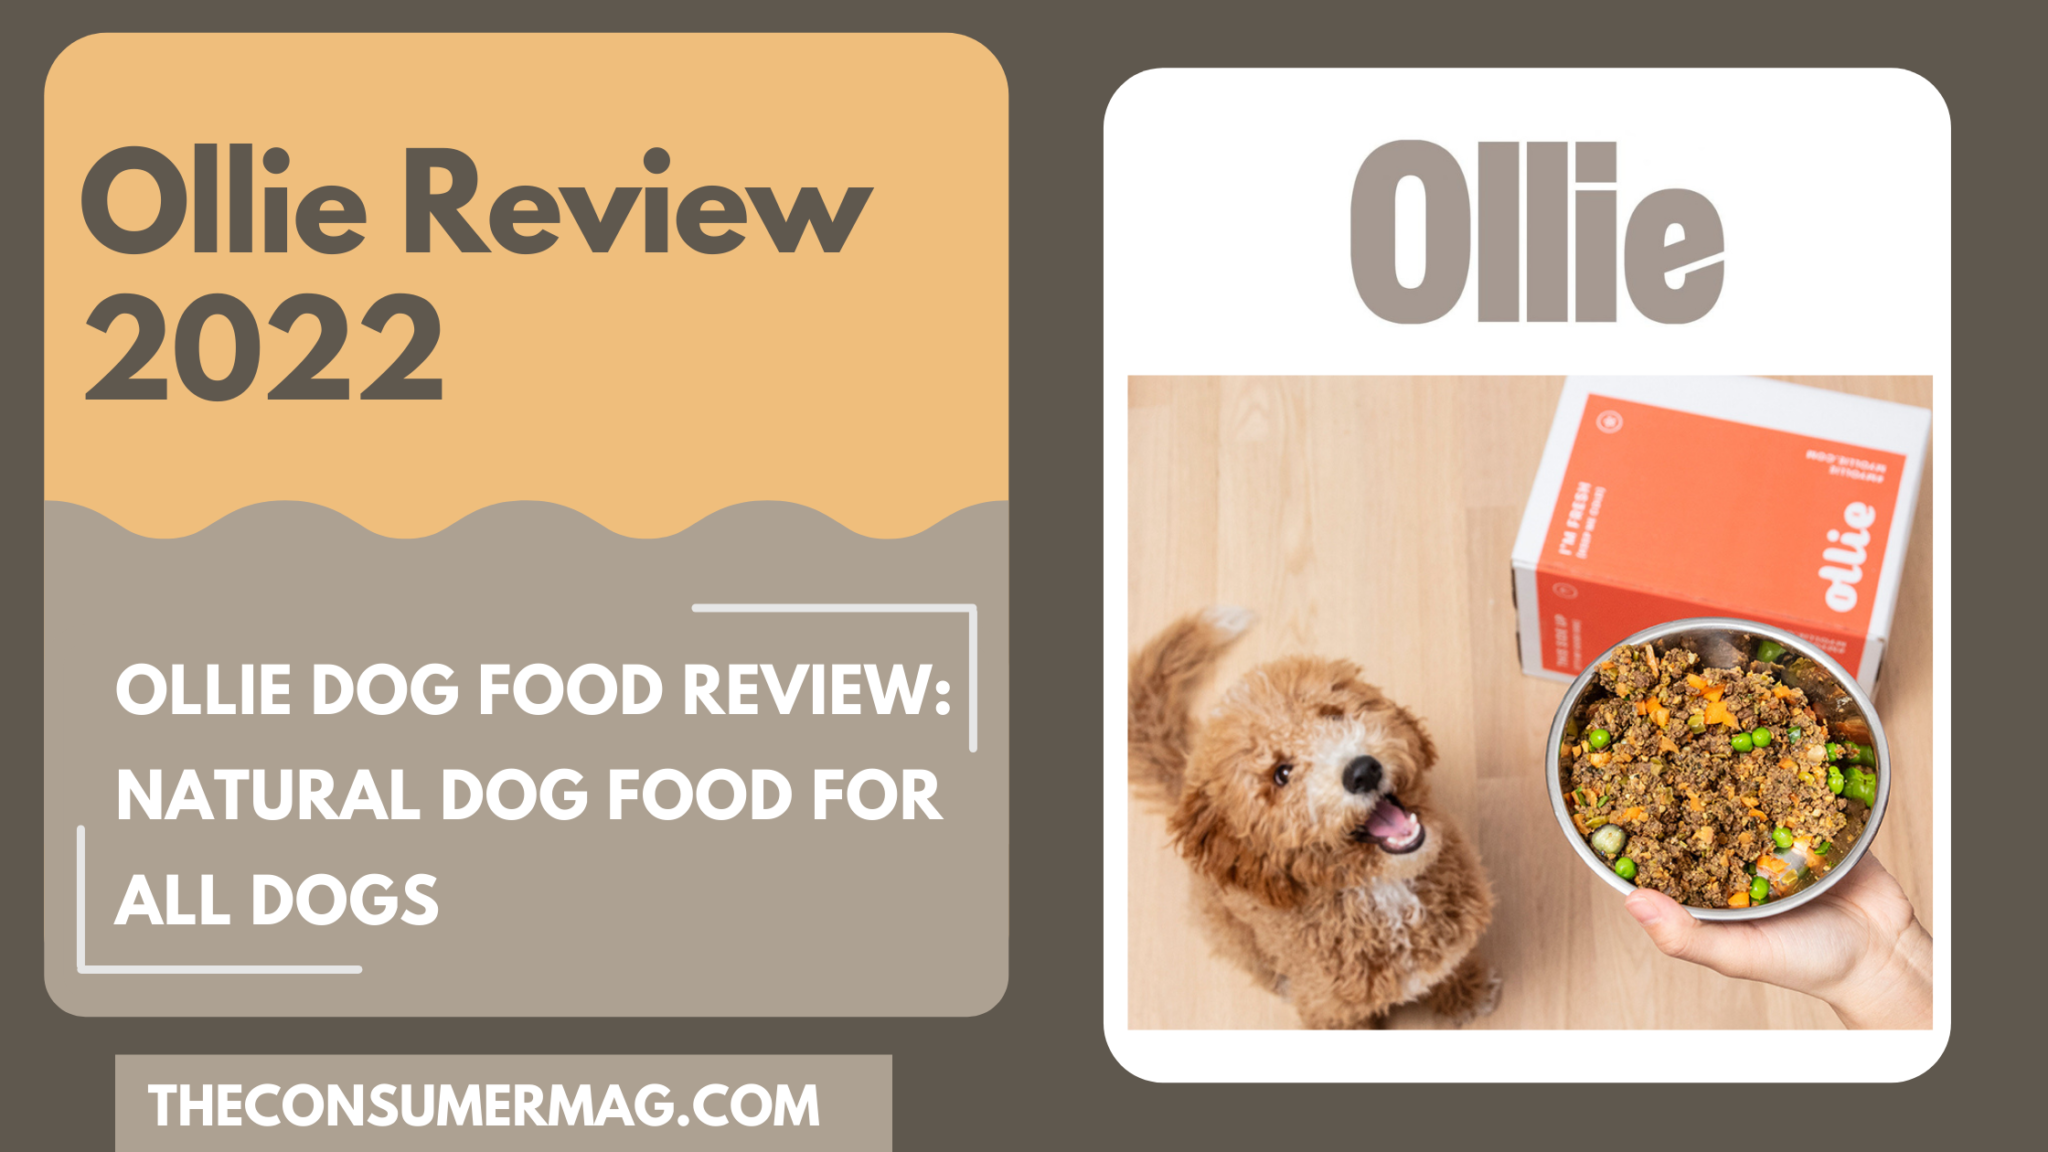 Ollie Review 2022− Everything you need to know about Ollie Dog Food